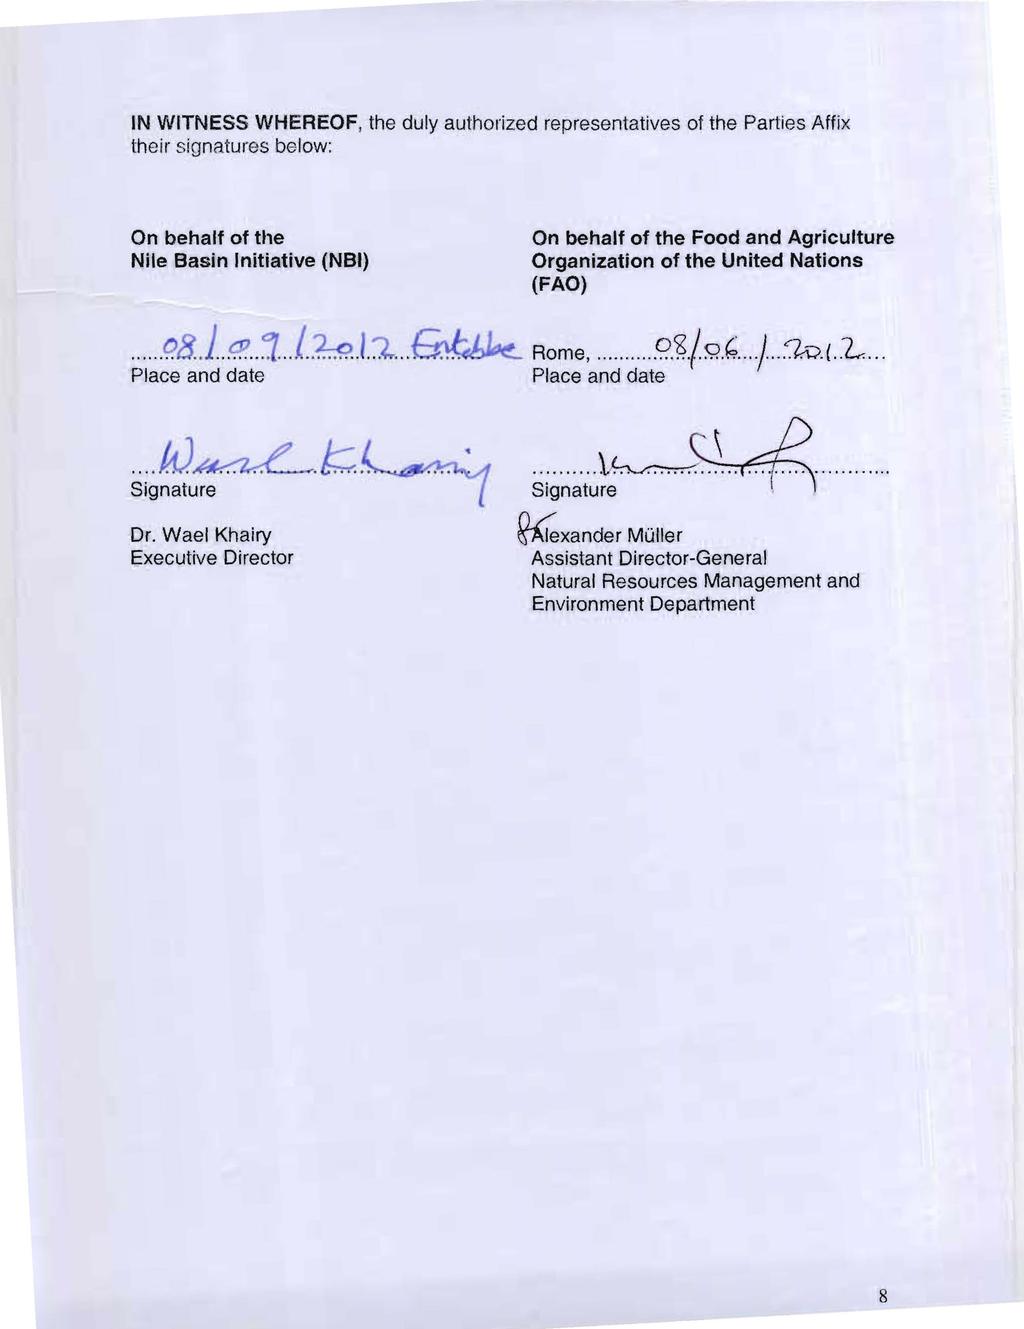 IN WITNESS WH,EREOF, the duly authorized representatives of the Parties Affix their signatures below: On behalf of the Nile Basin Initiative (NBI) Place and date On behalf of the Food and Agriculture